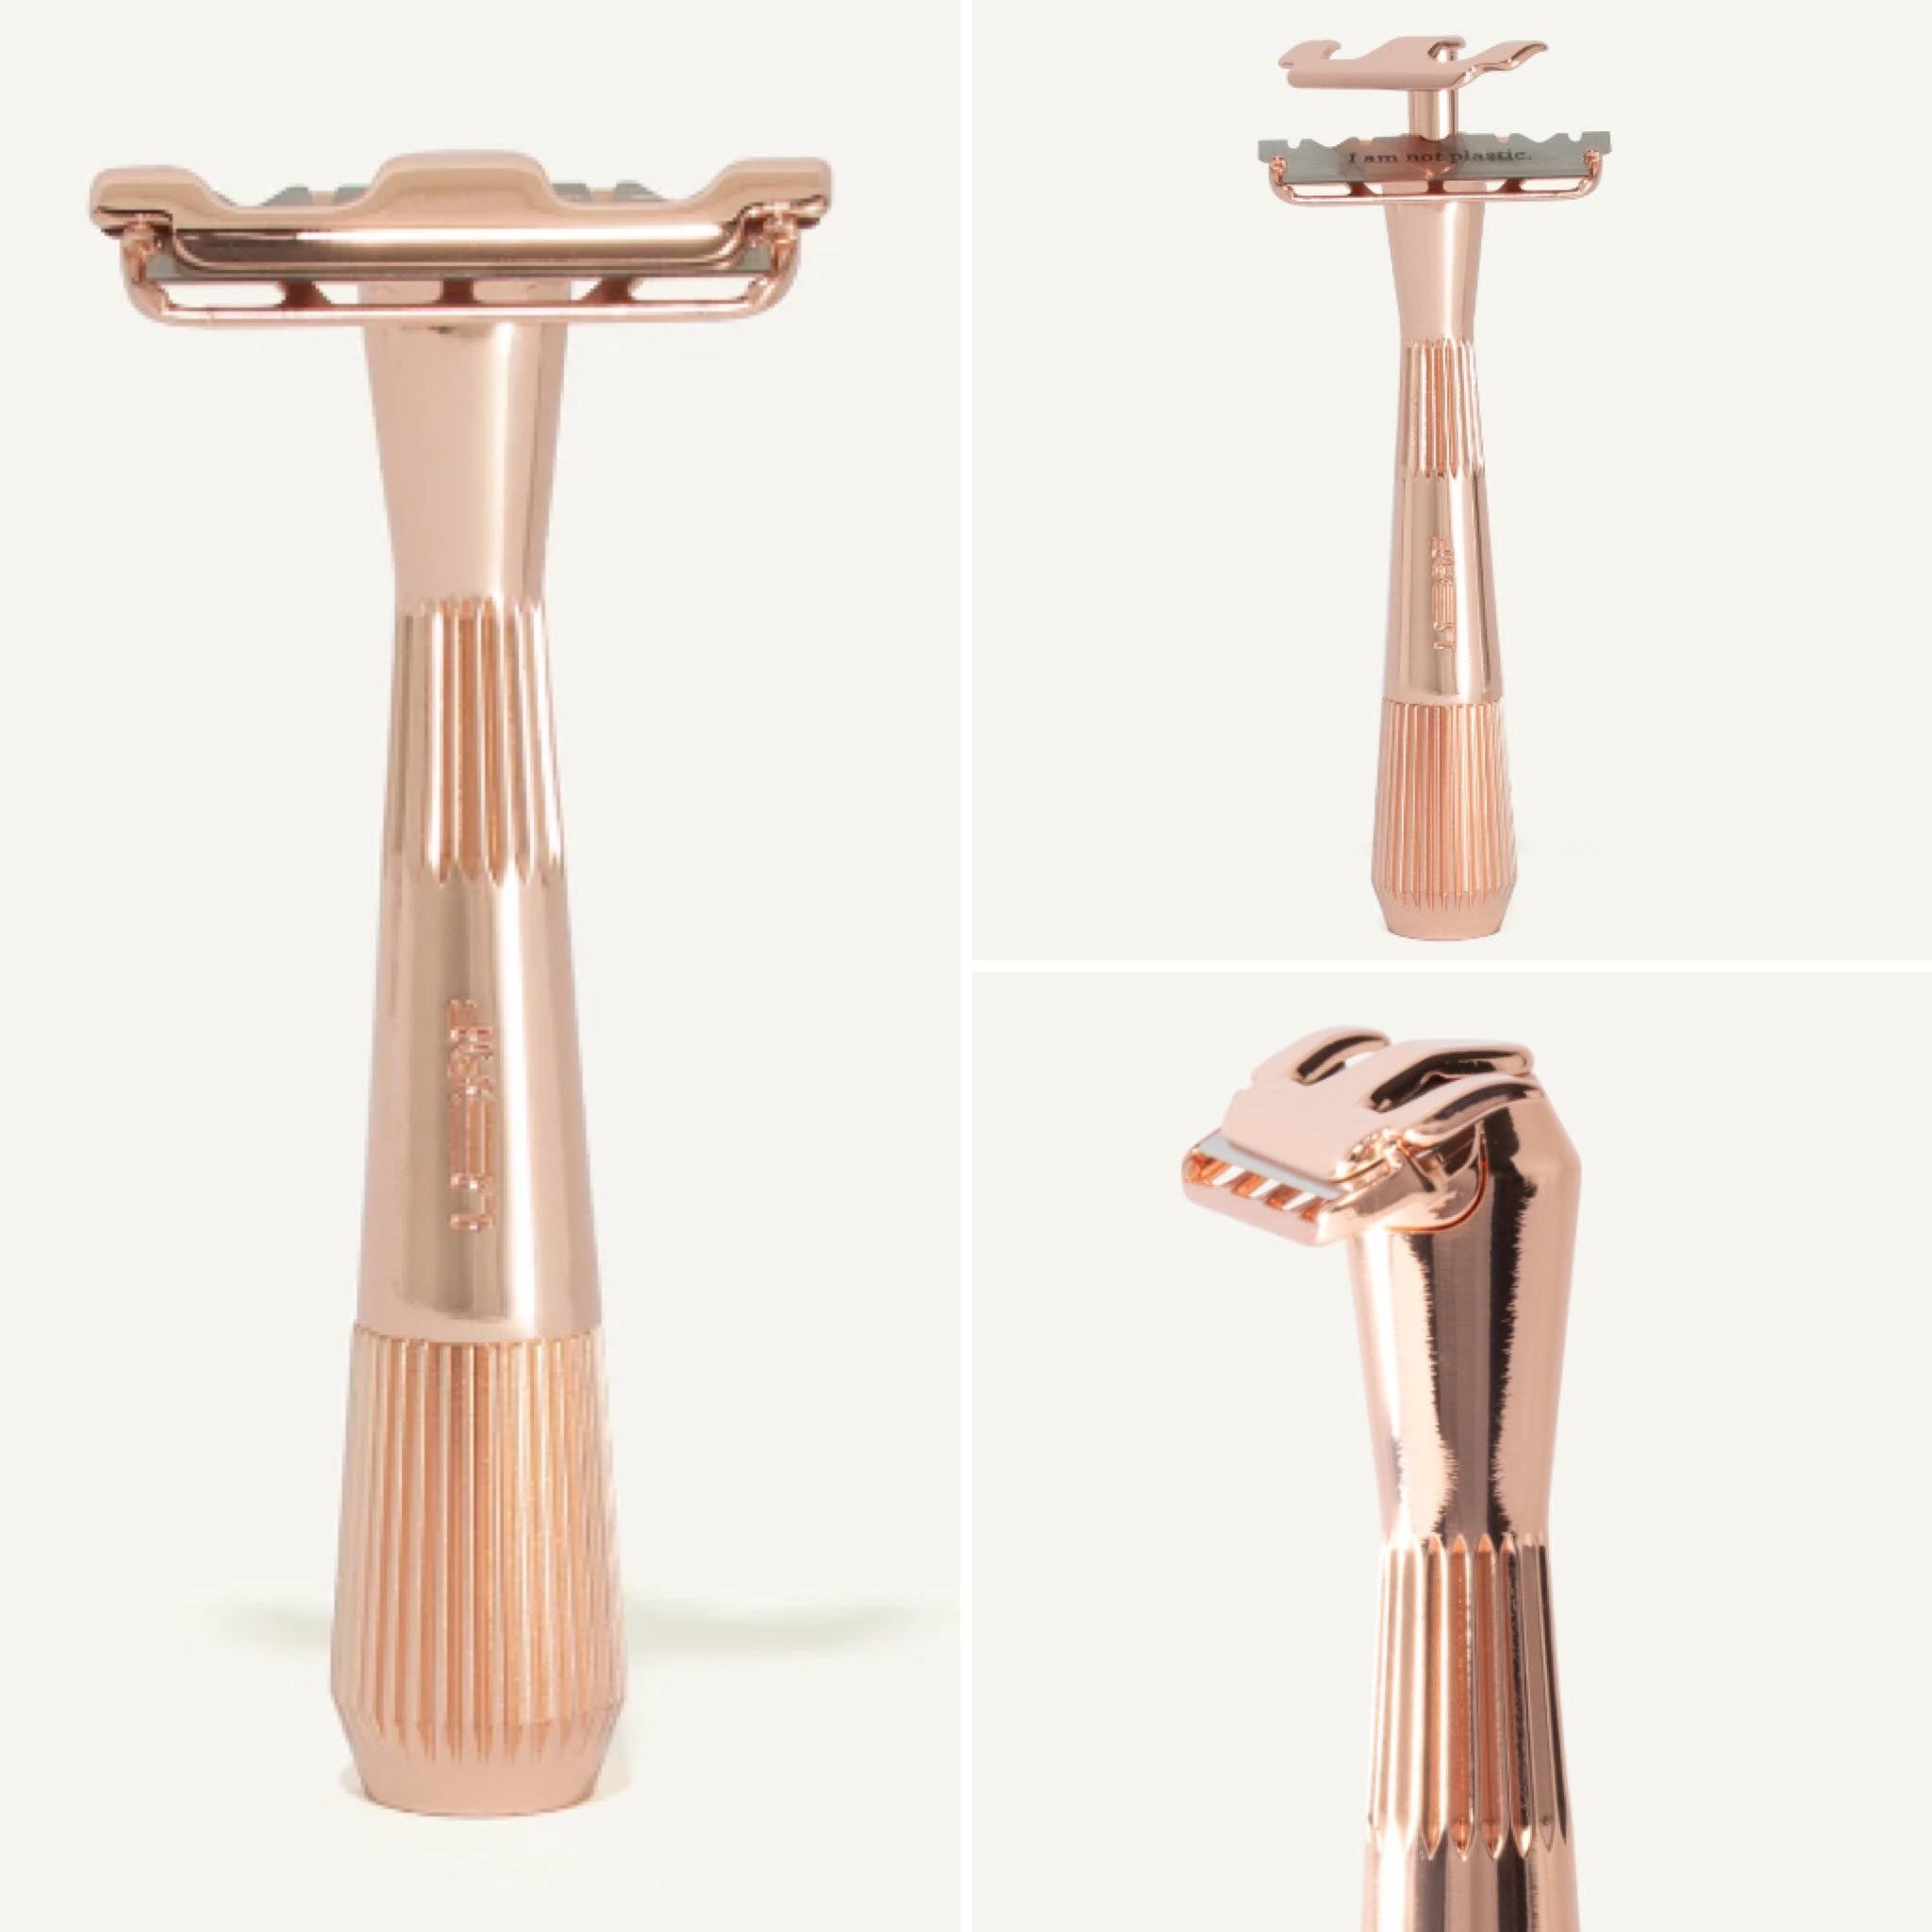 The Twig Razor with a rose gold finish is a  single edge razor reimagined for sensitive skin, safe-use, and small places.